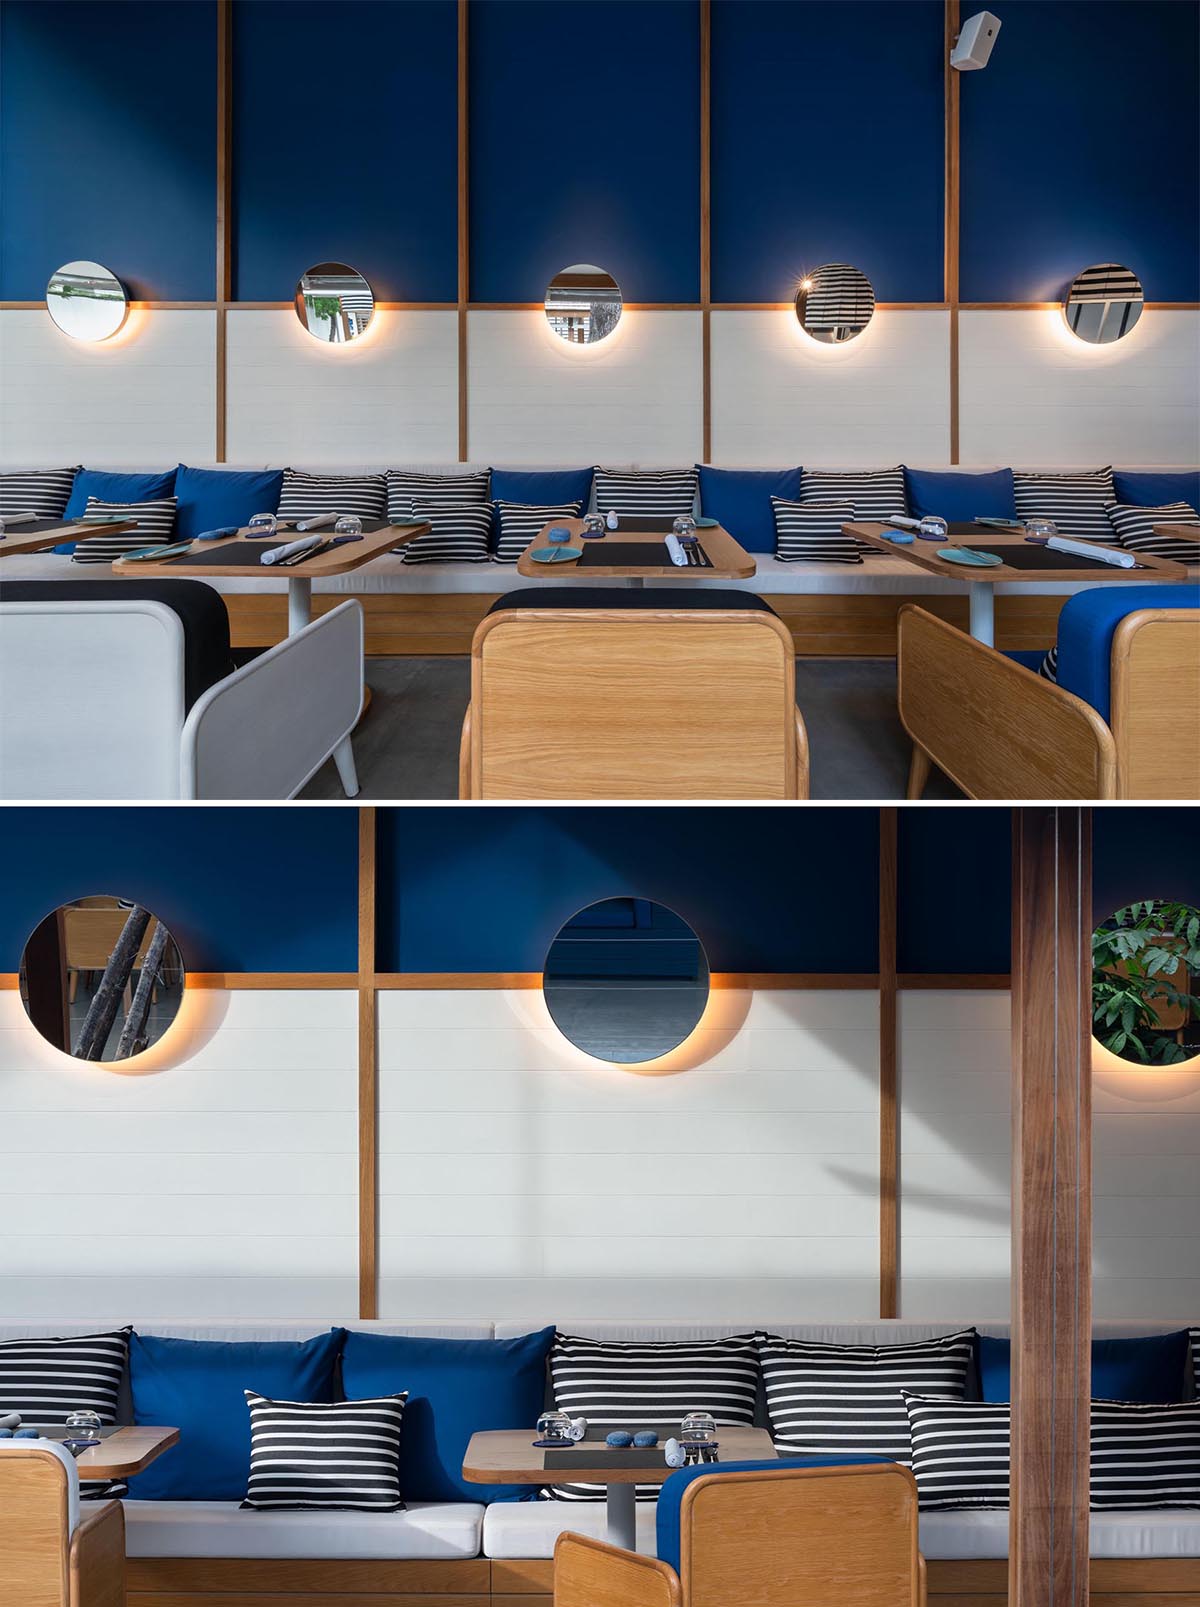 A modern hotel restaurant with a blue and white theme, as well as black and white striped accents.